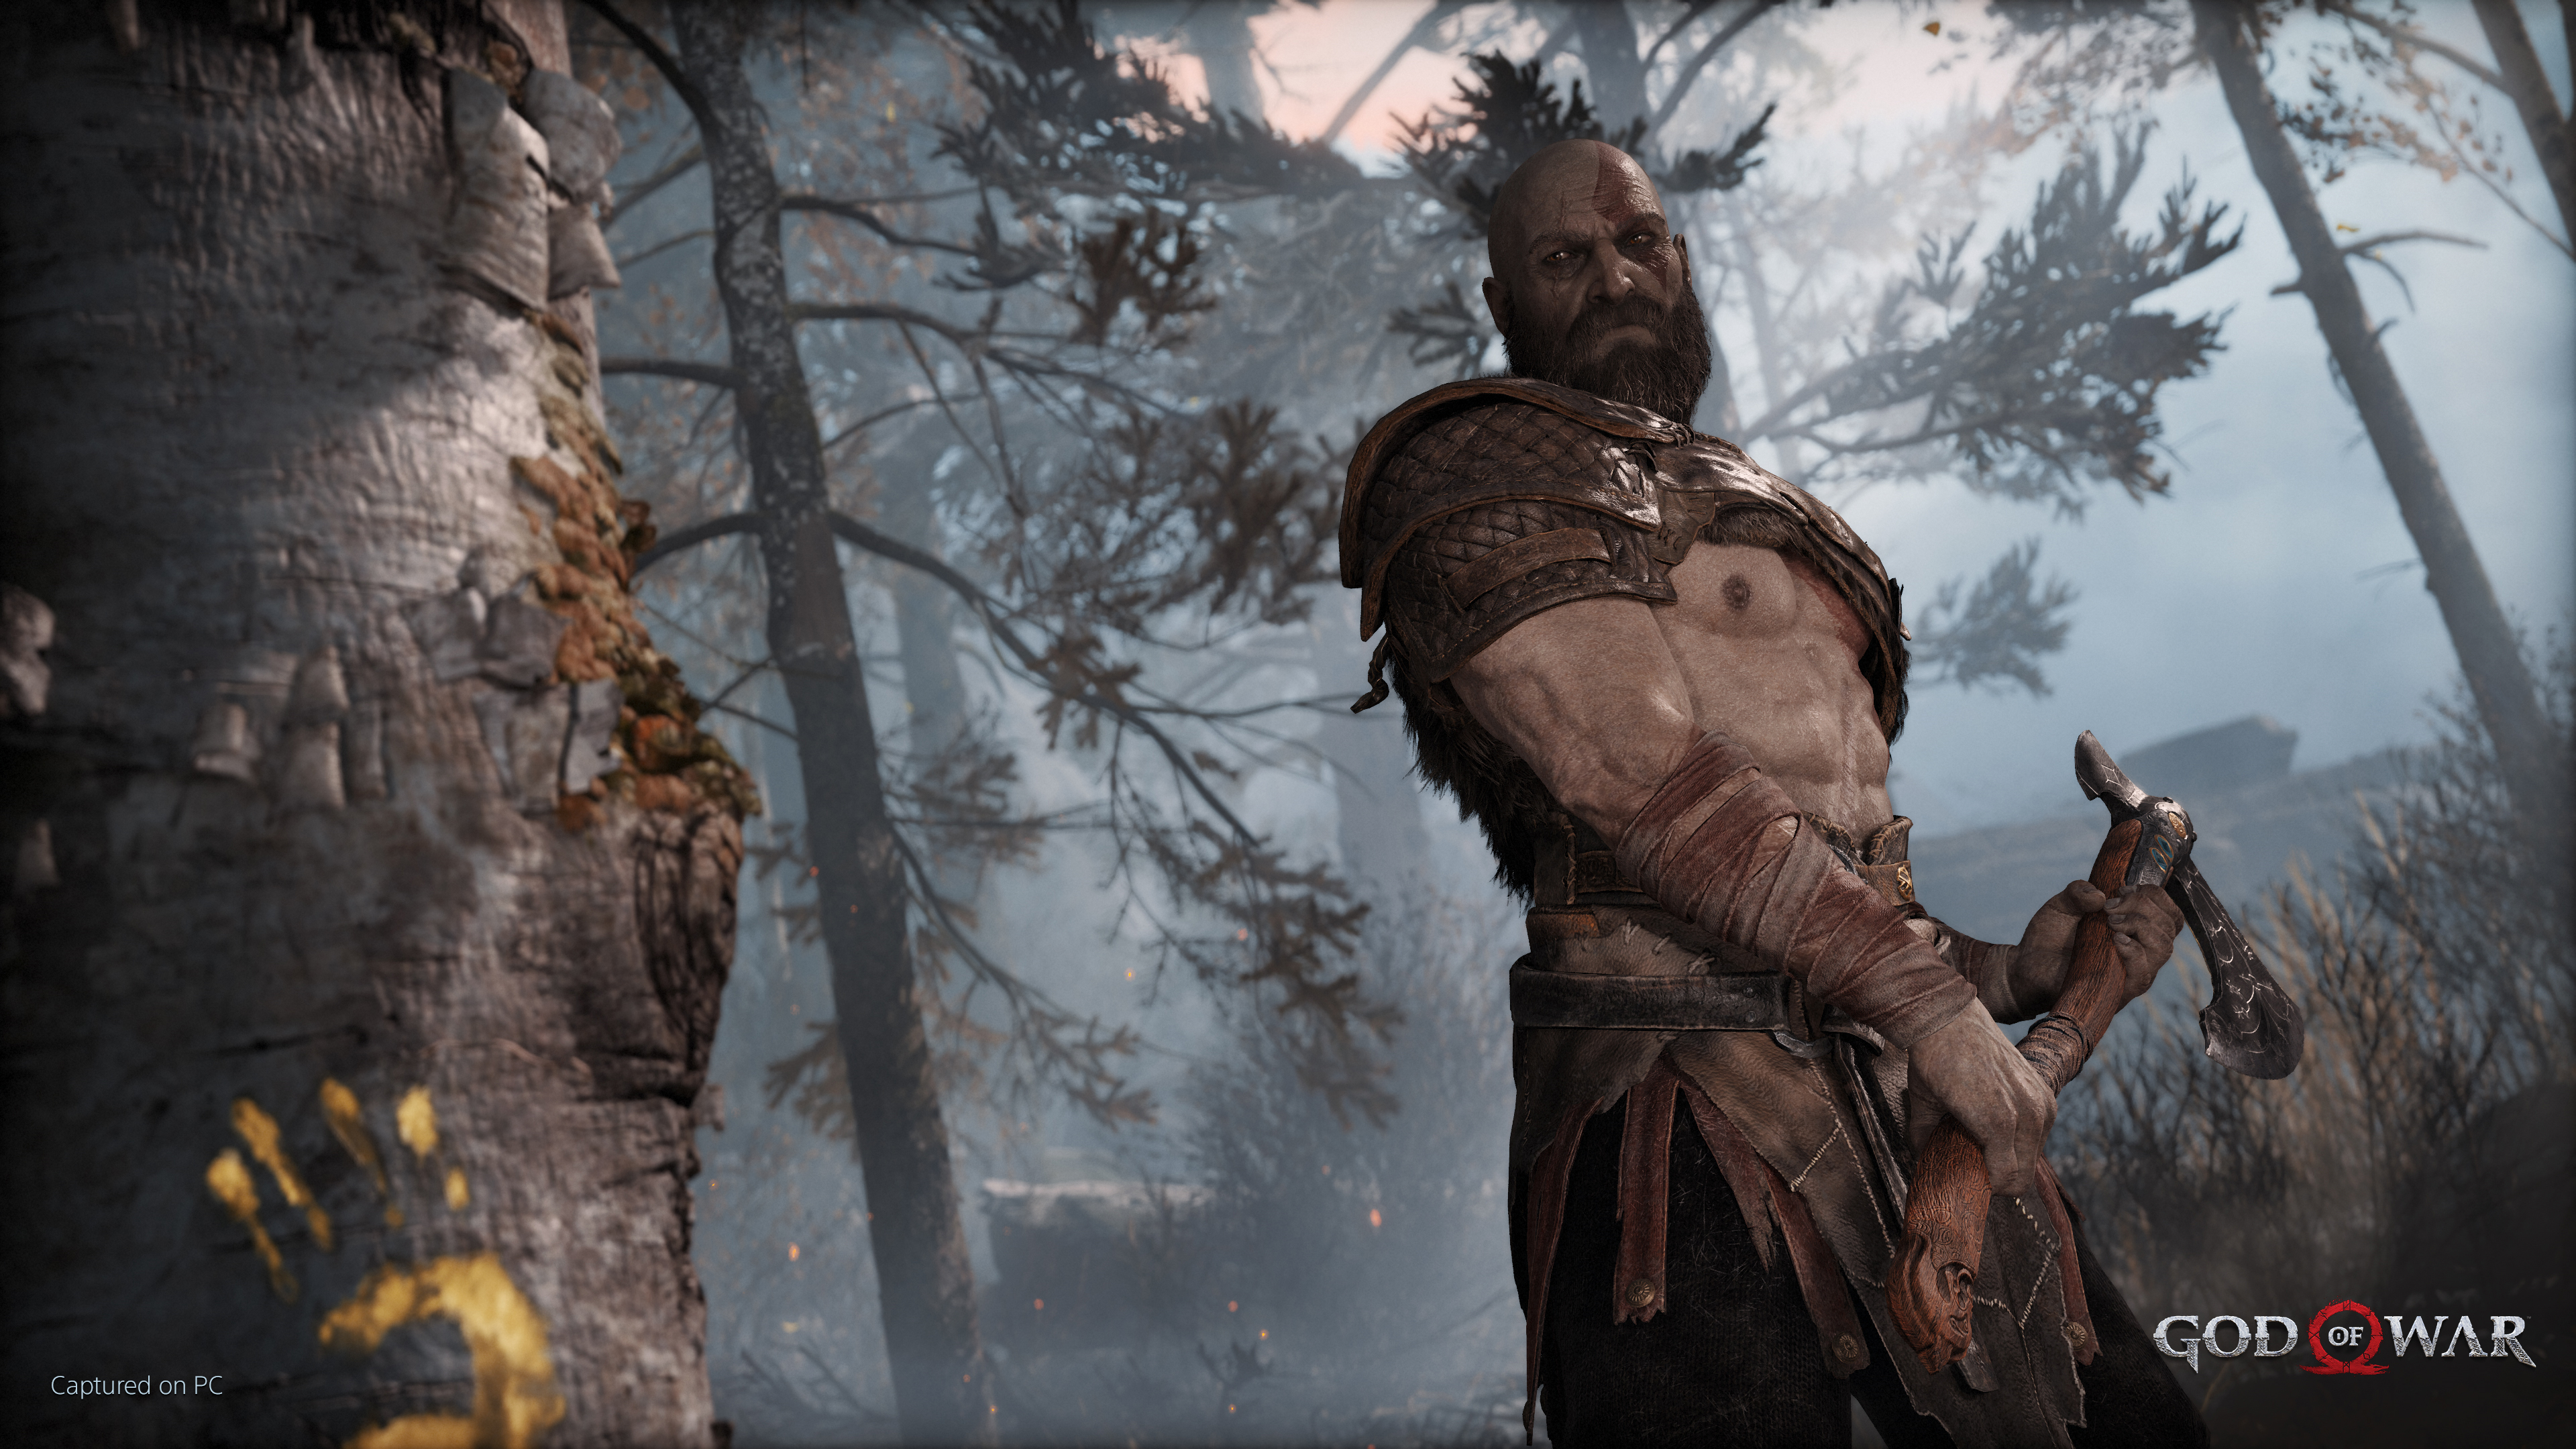 God of War PC Trailer & System Requirements Released, GeForce News